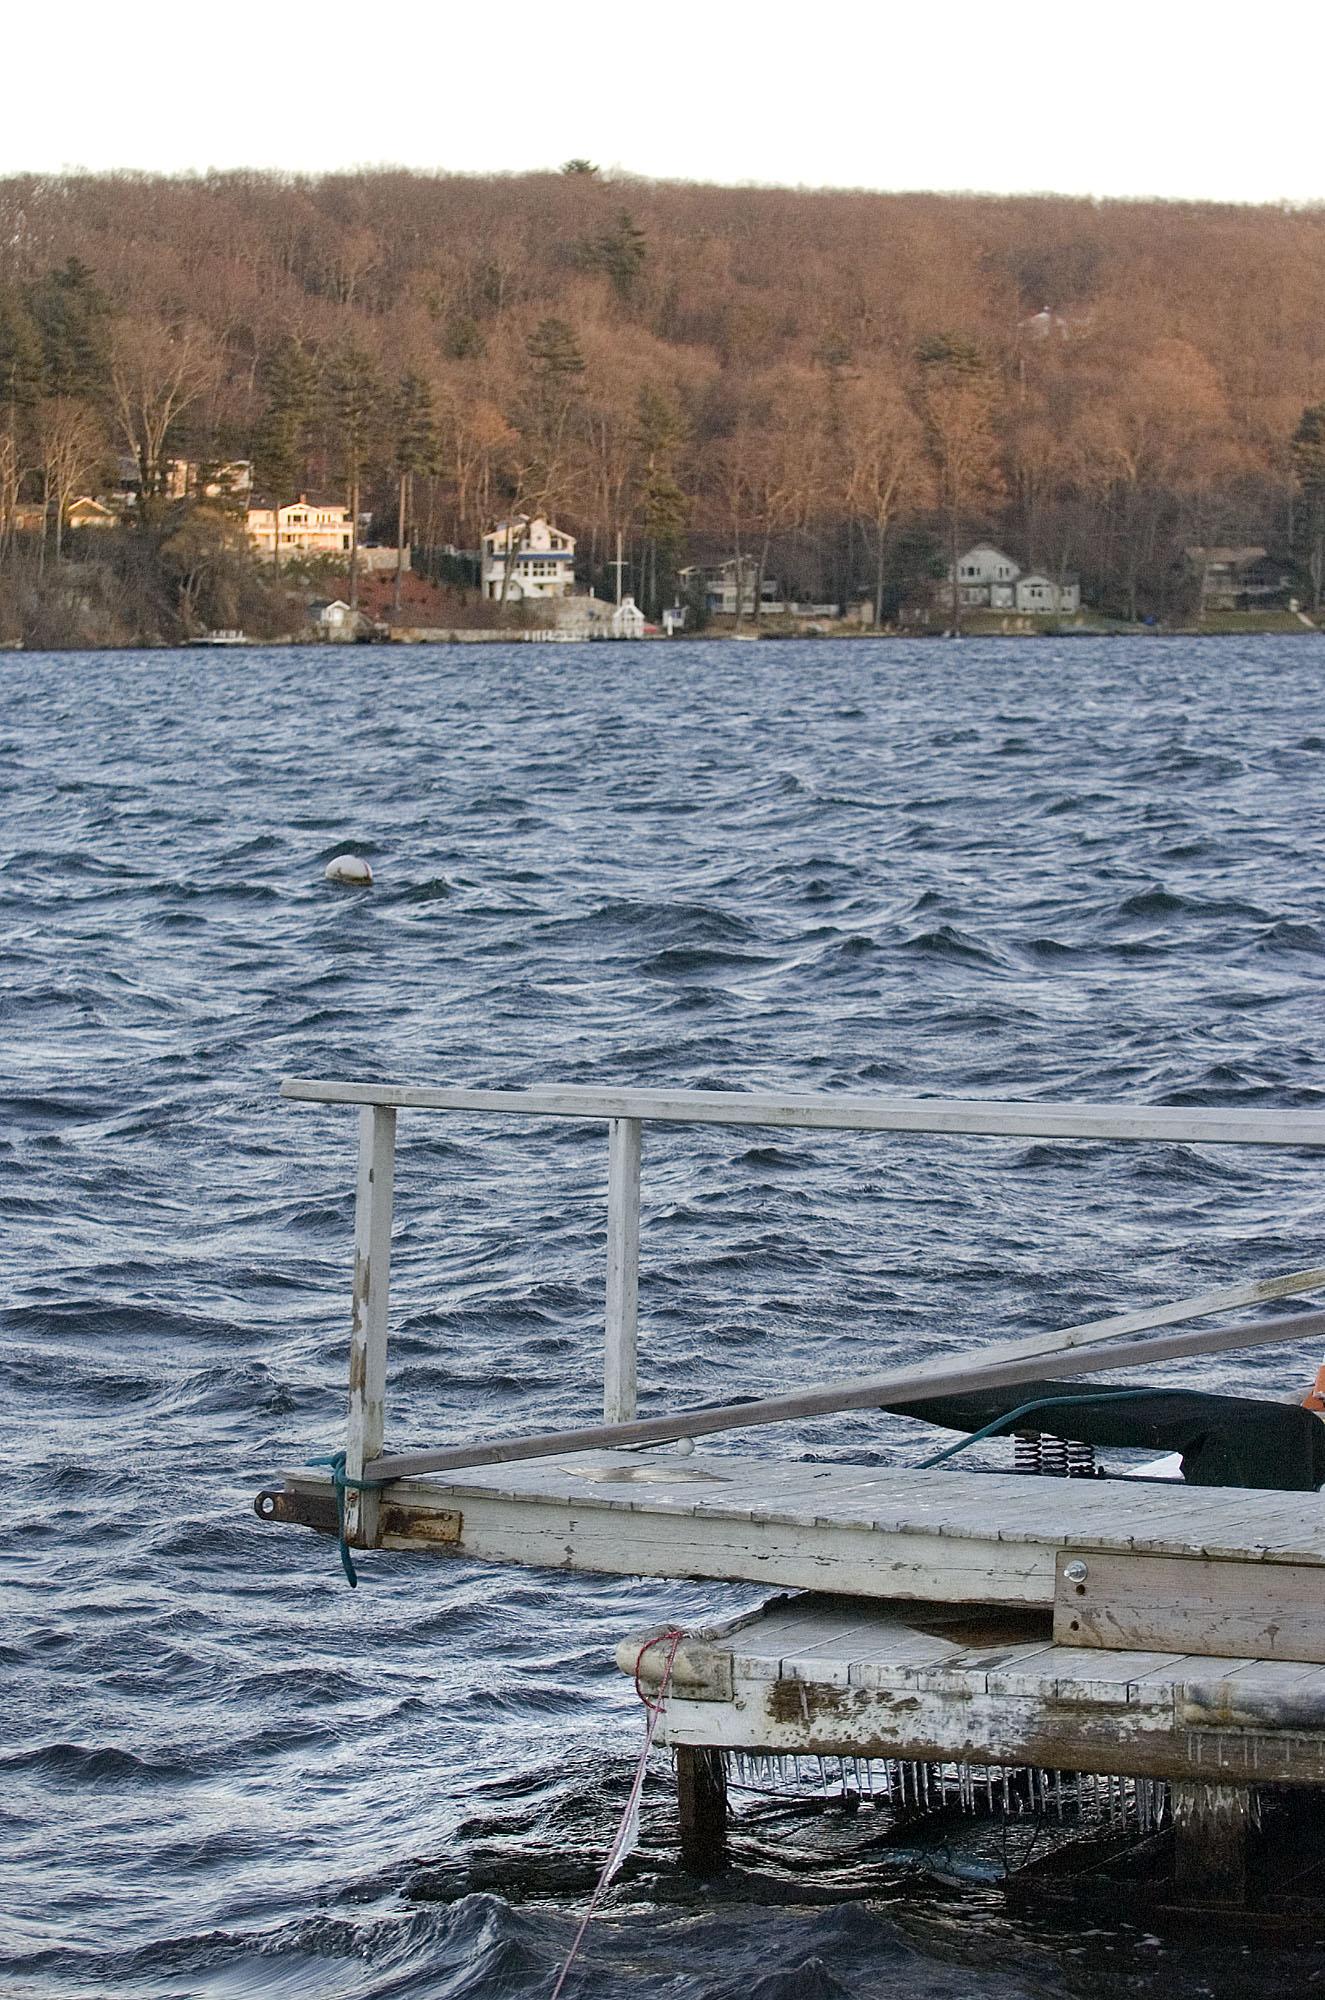 Zebra mussels threat prompts change in annual drawdown at Candlewood Lake